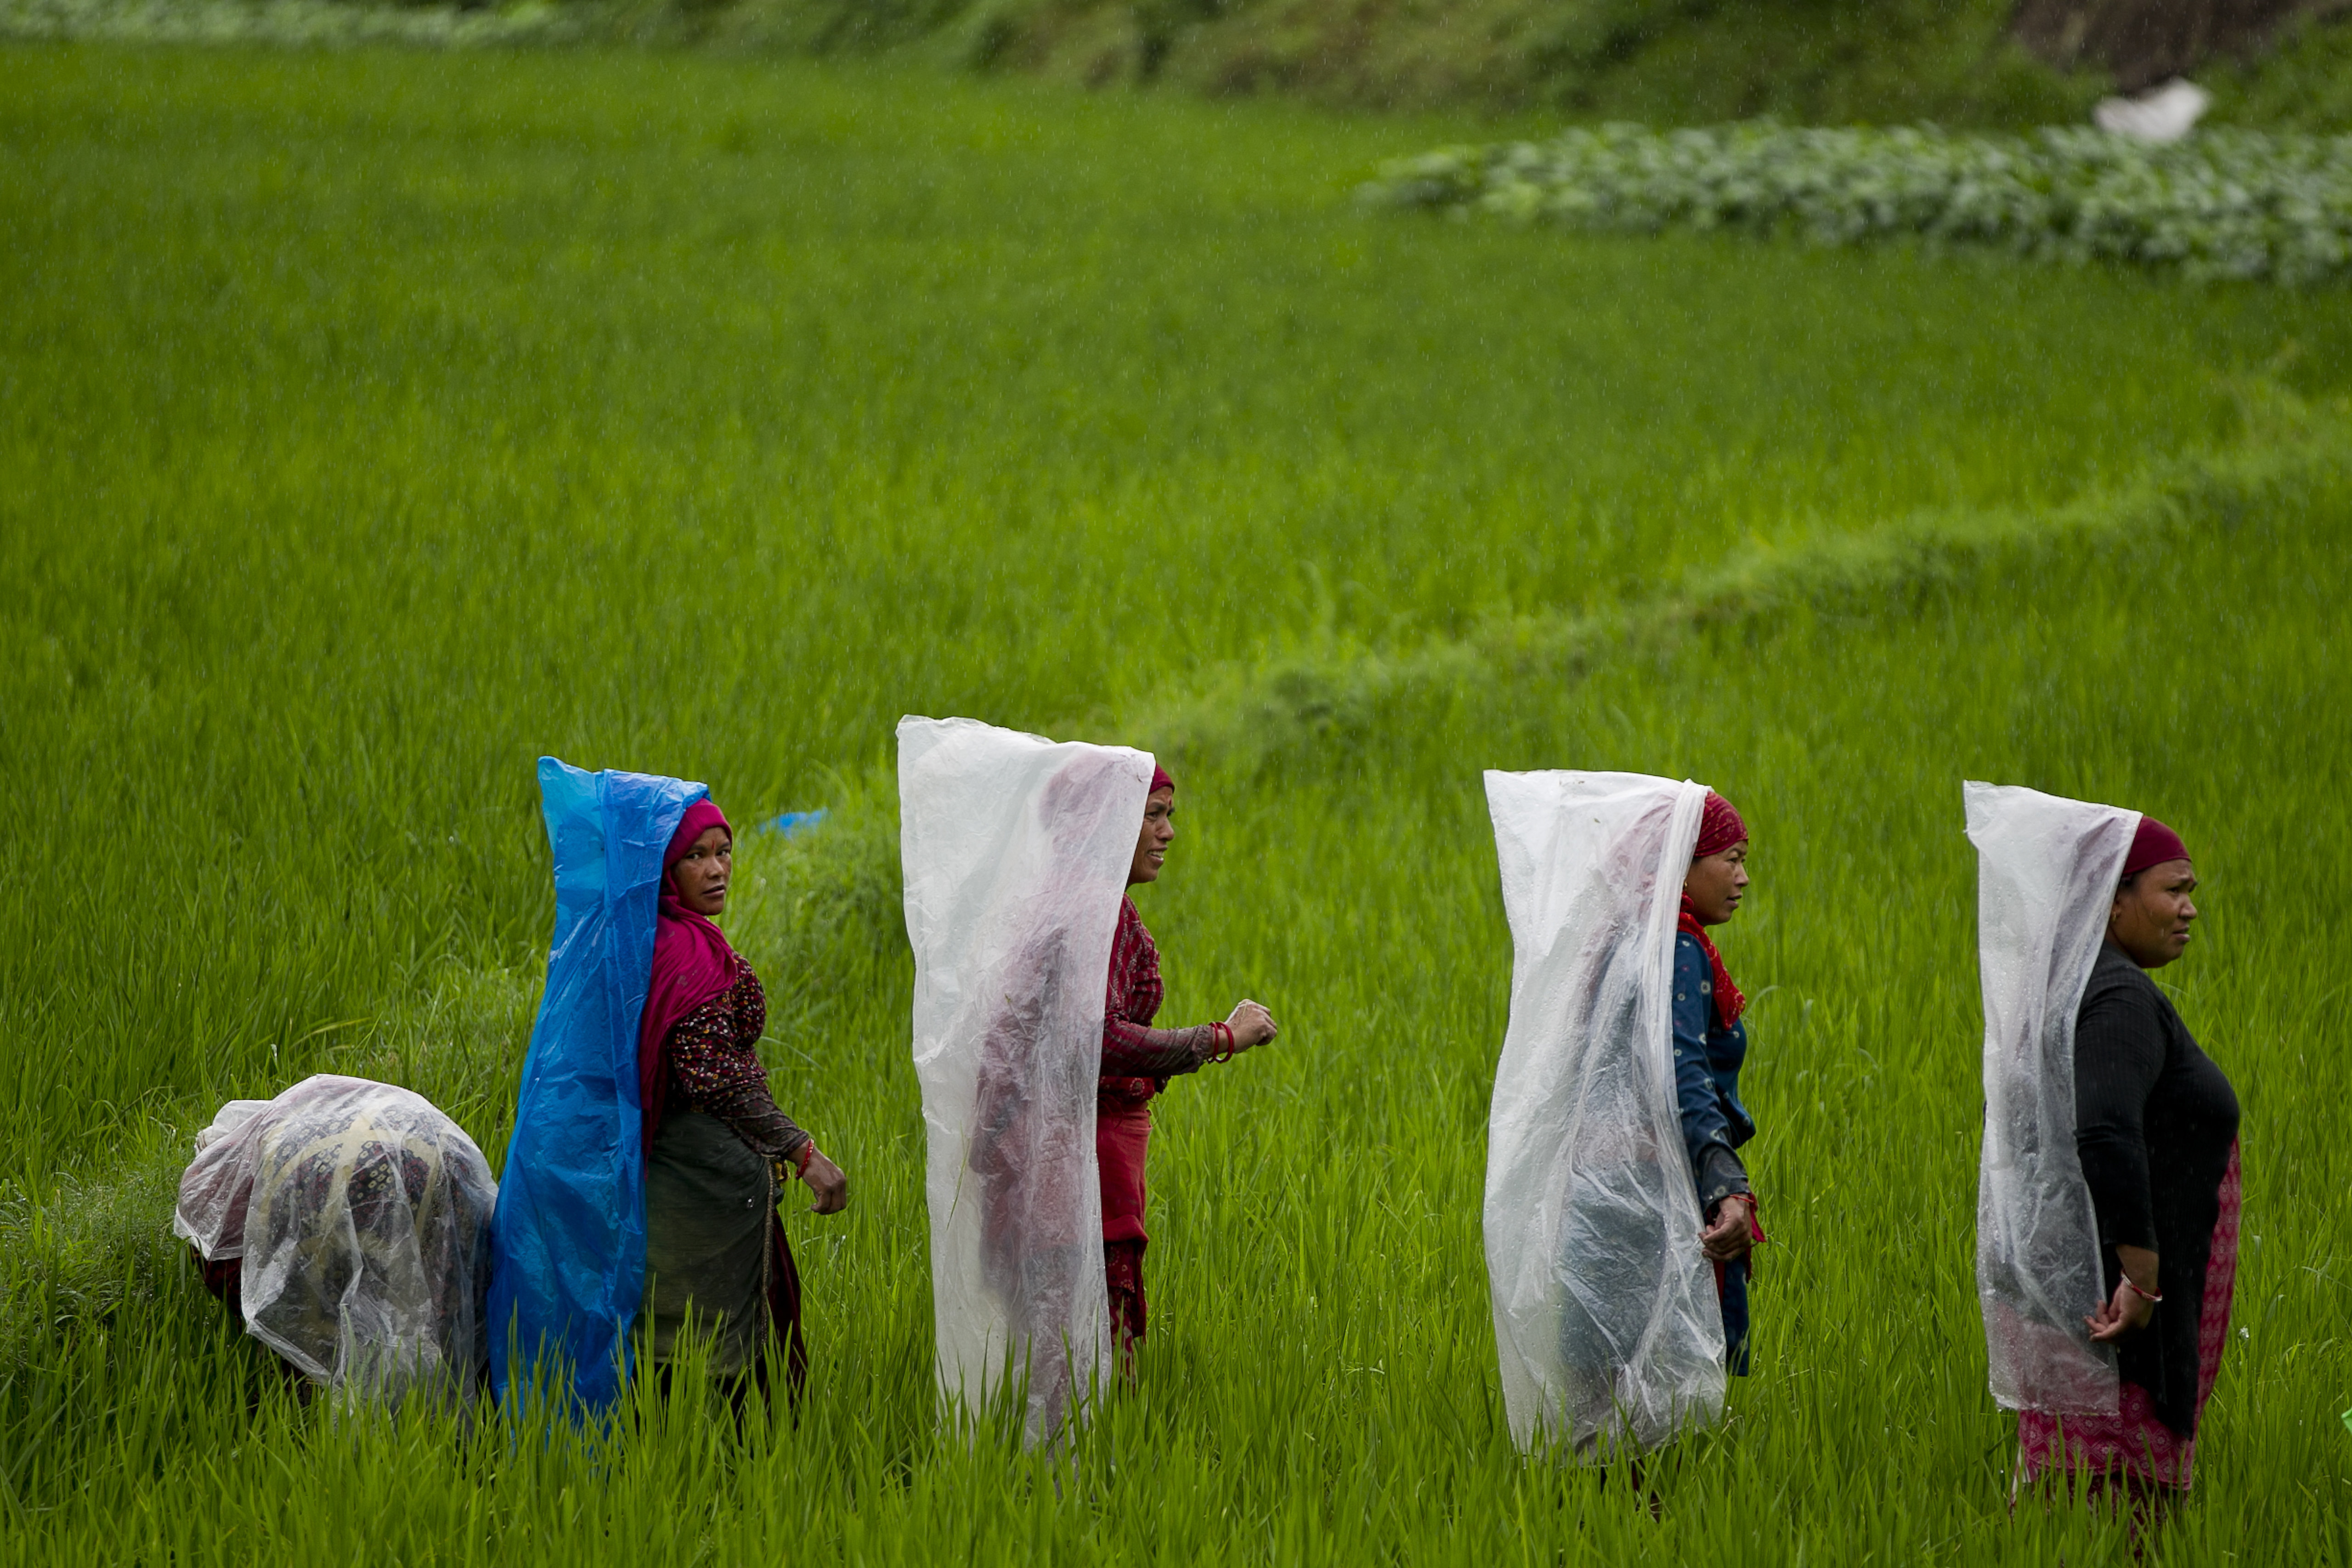 Nepalese farmers cover themselves with plastic sheets as they work in a paddy field during a drizzle in Kathmandu, Nepal, Monday, July 2, 2018. Agriculture is the main source of income and employment for most people in Nepal, and rice is one of the main crops. (AP Photo/Niranjan Shrestha)